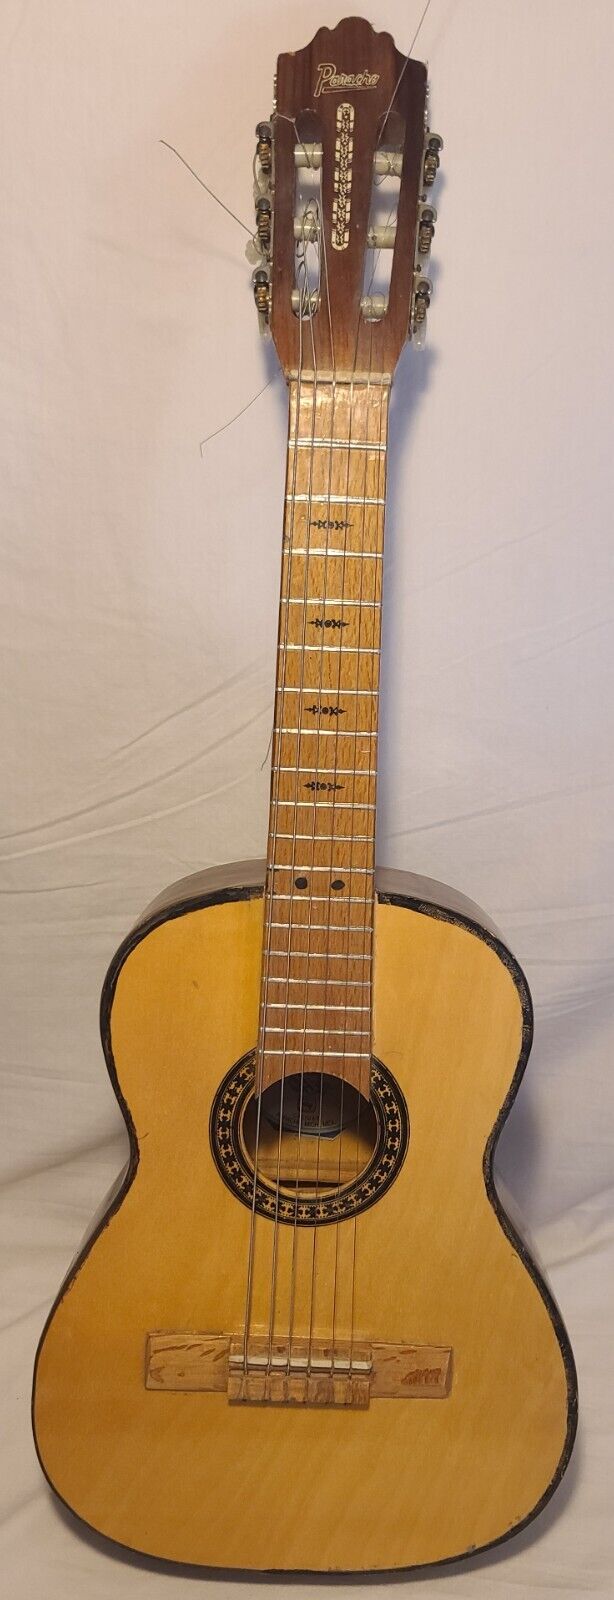 Paracho Small Acoustic Guitar ~ Used 1